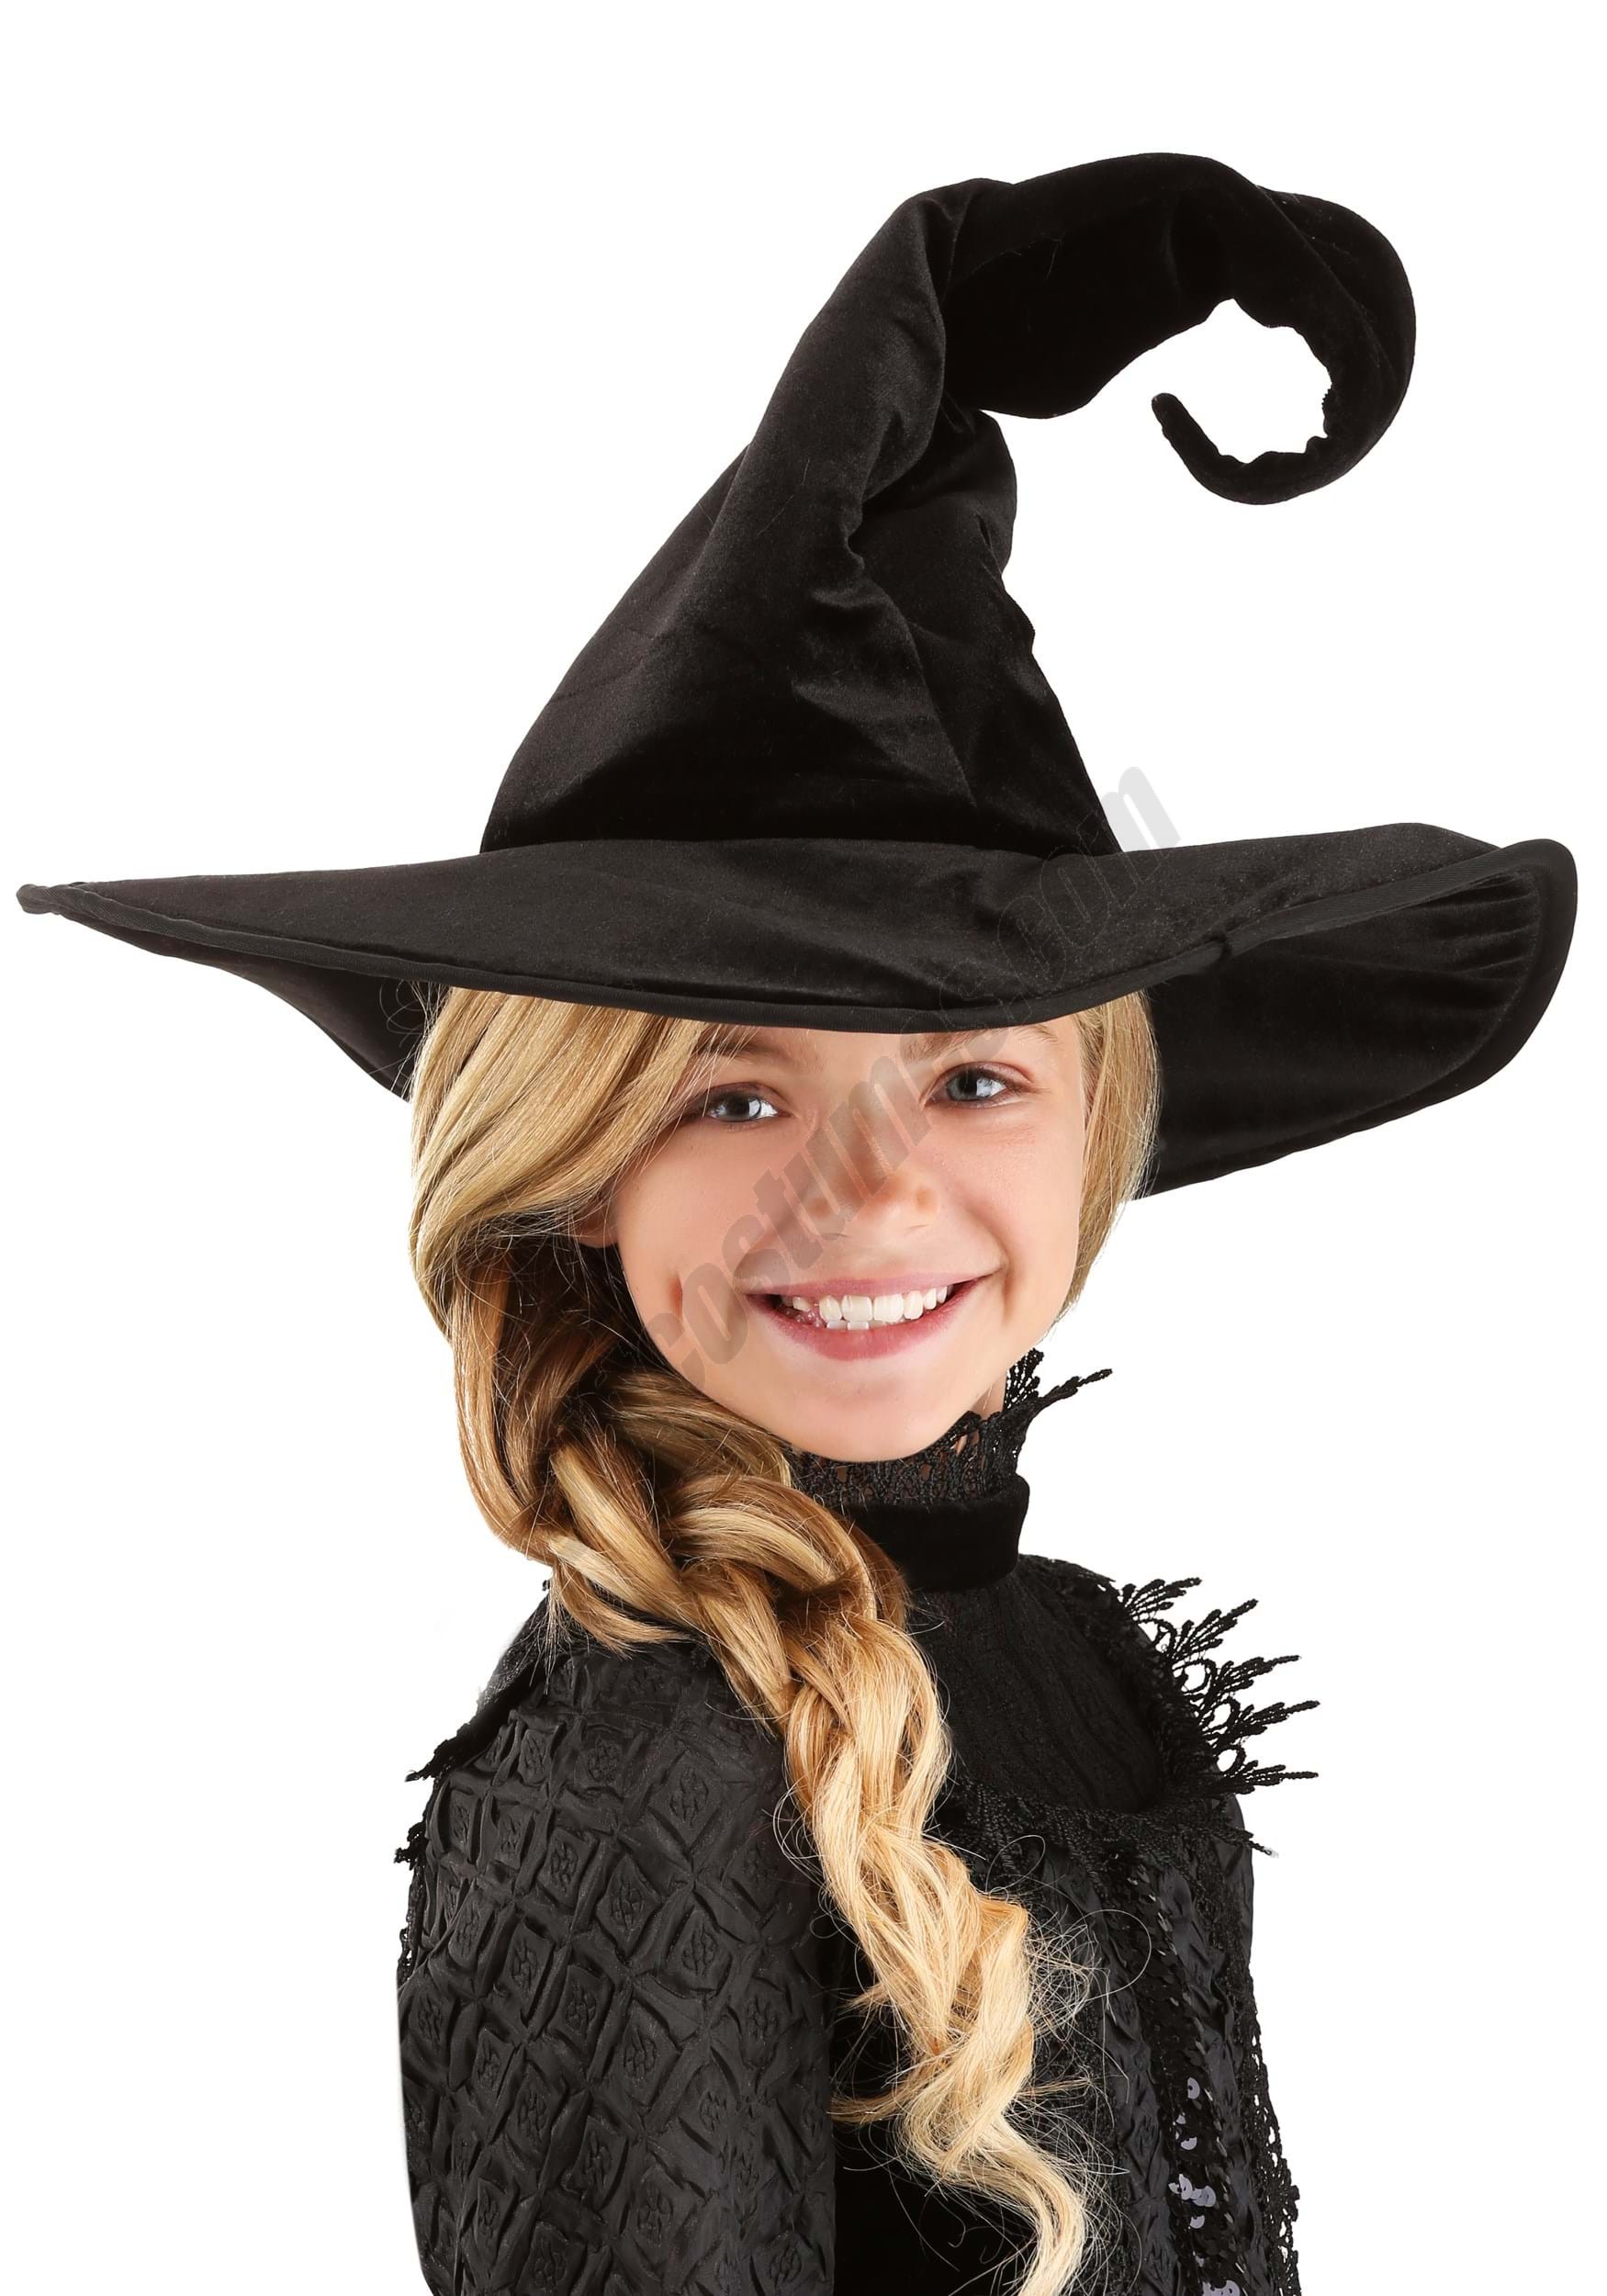 Deluxe Kid's Witch Hat Promotions - Deluxe Kid's Witch Hat Promotions